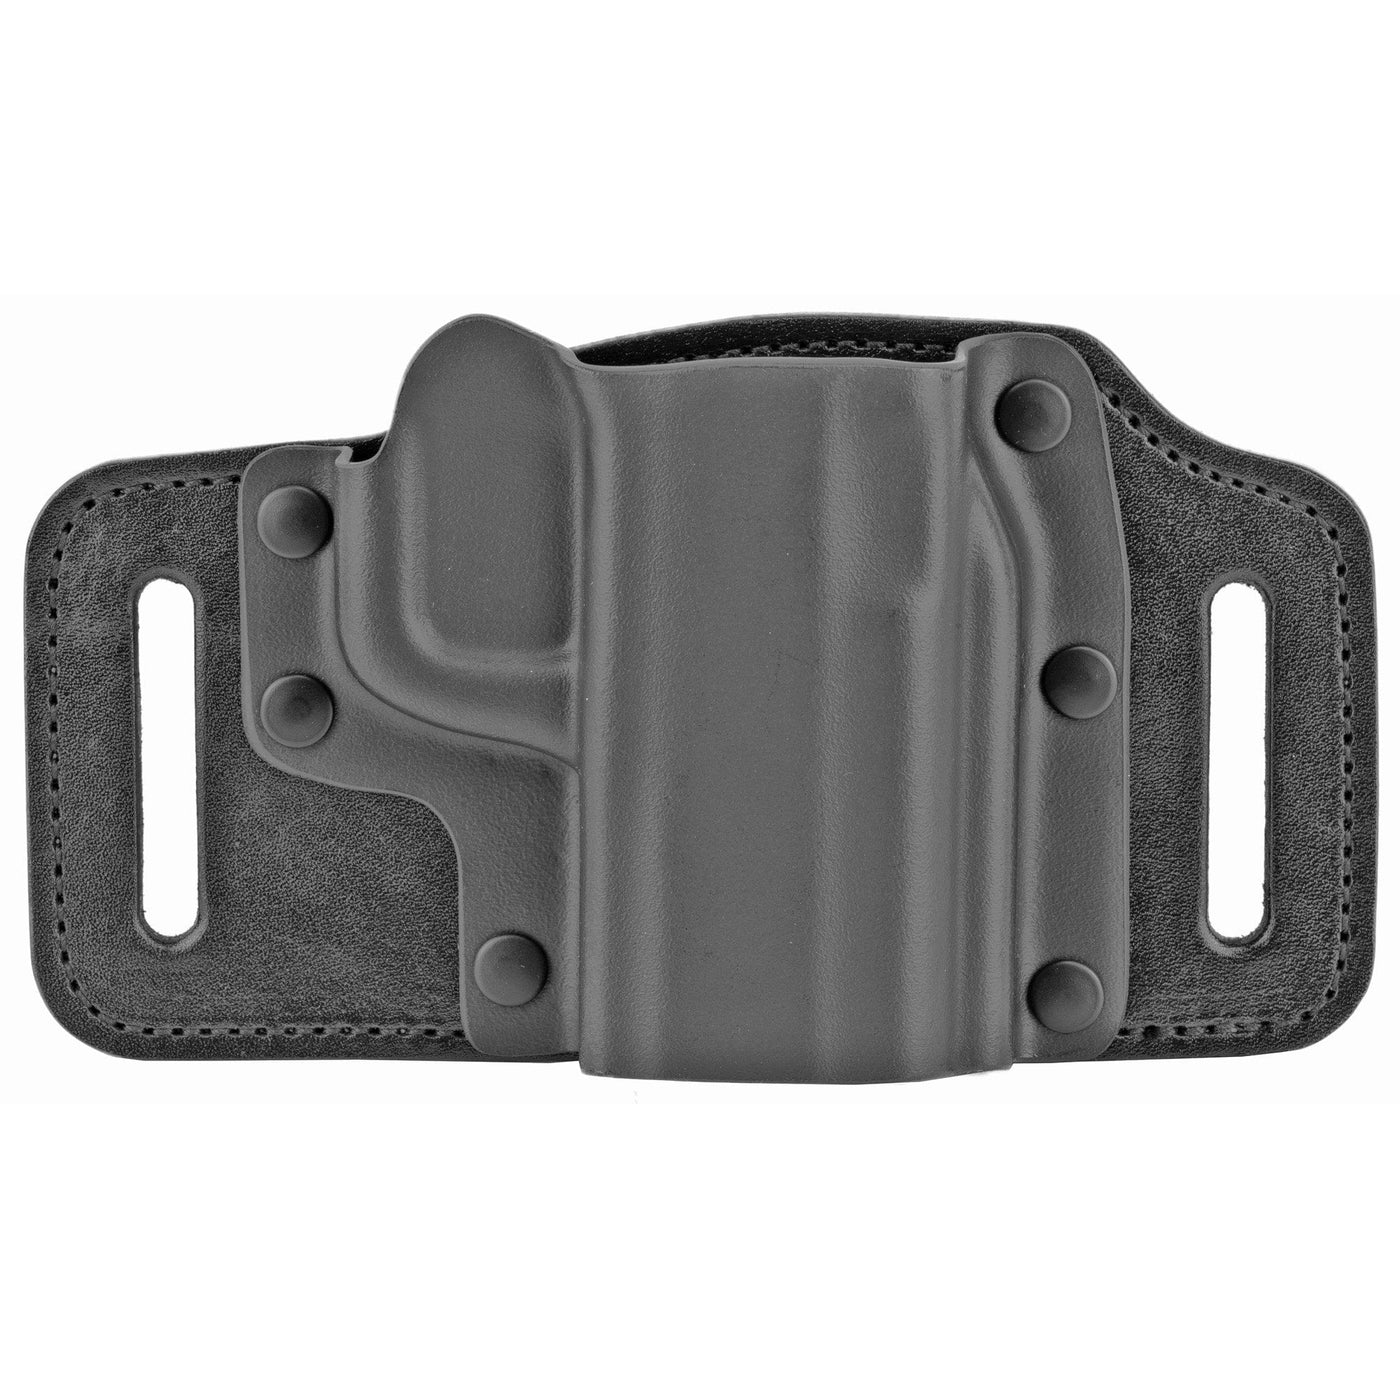 Galco Galco Tacslide Sw M&p 9/40 Rh Blk Holsters